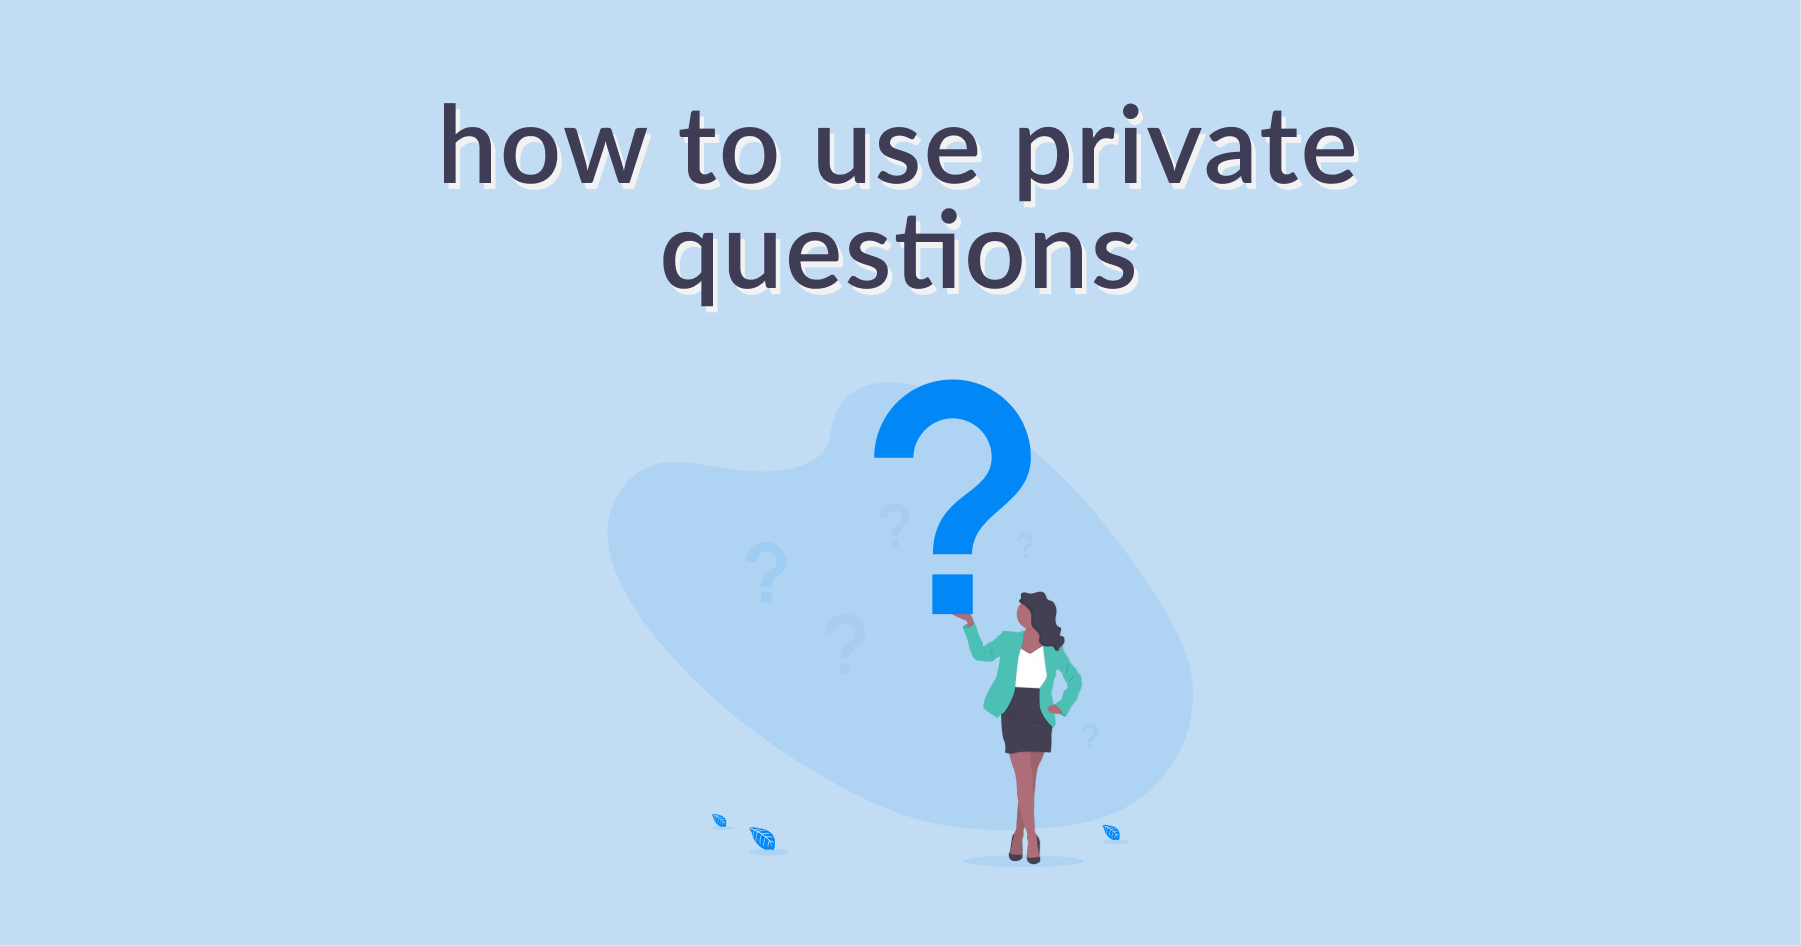 How to Use Private Questions for COVID-19 Health Checks